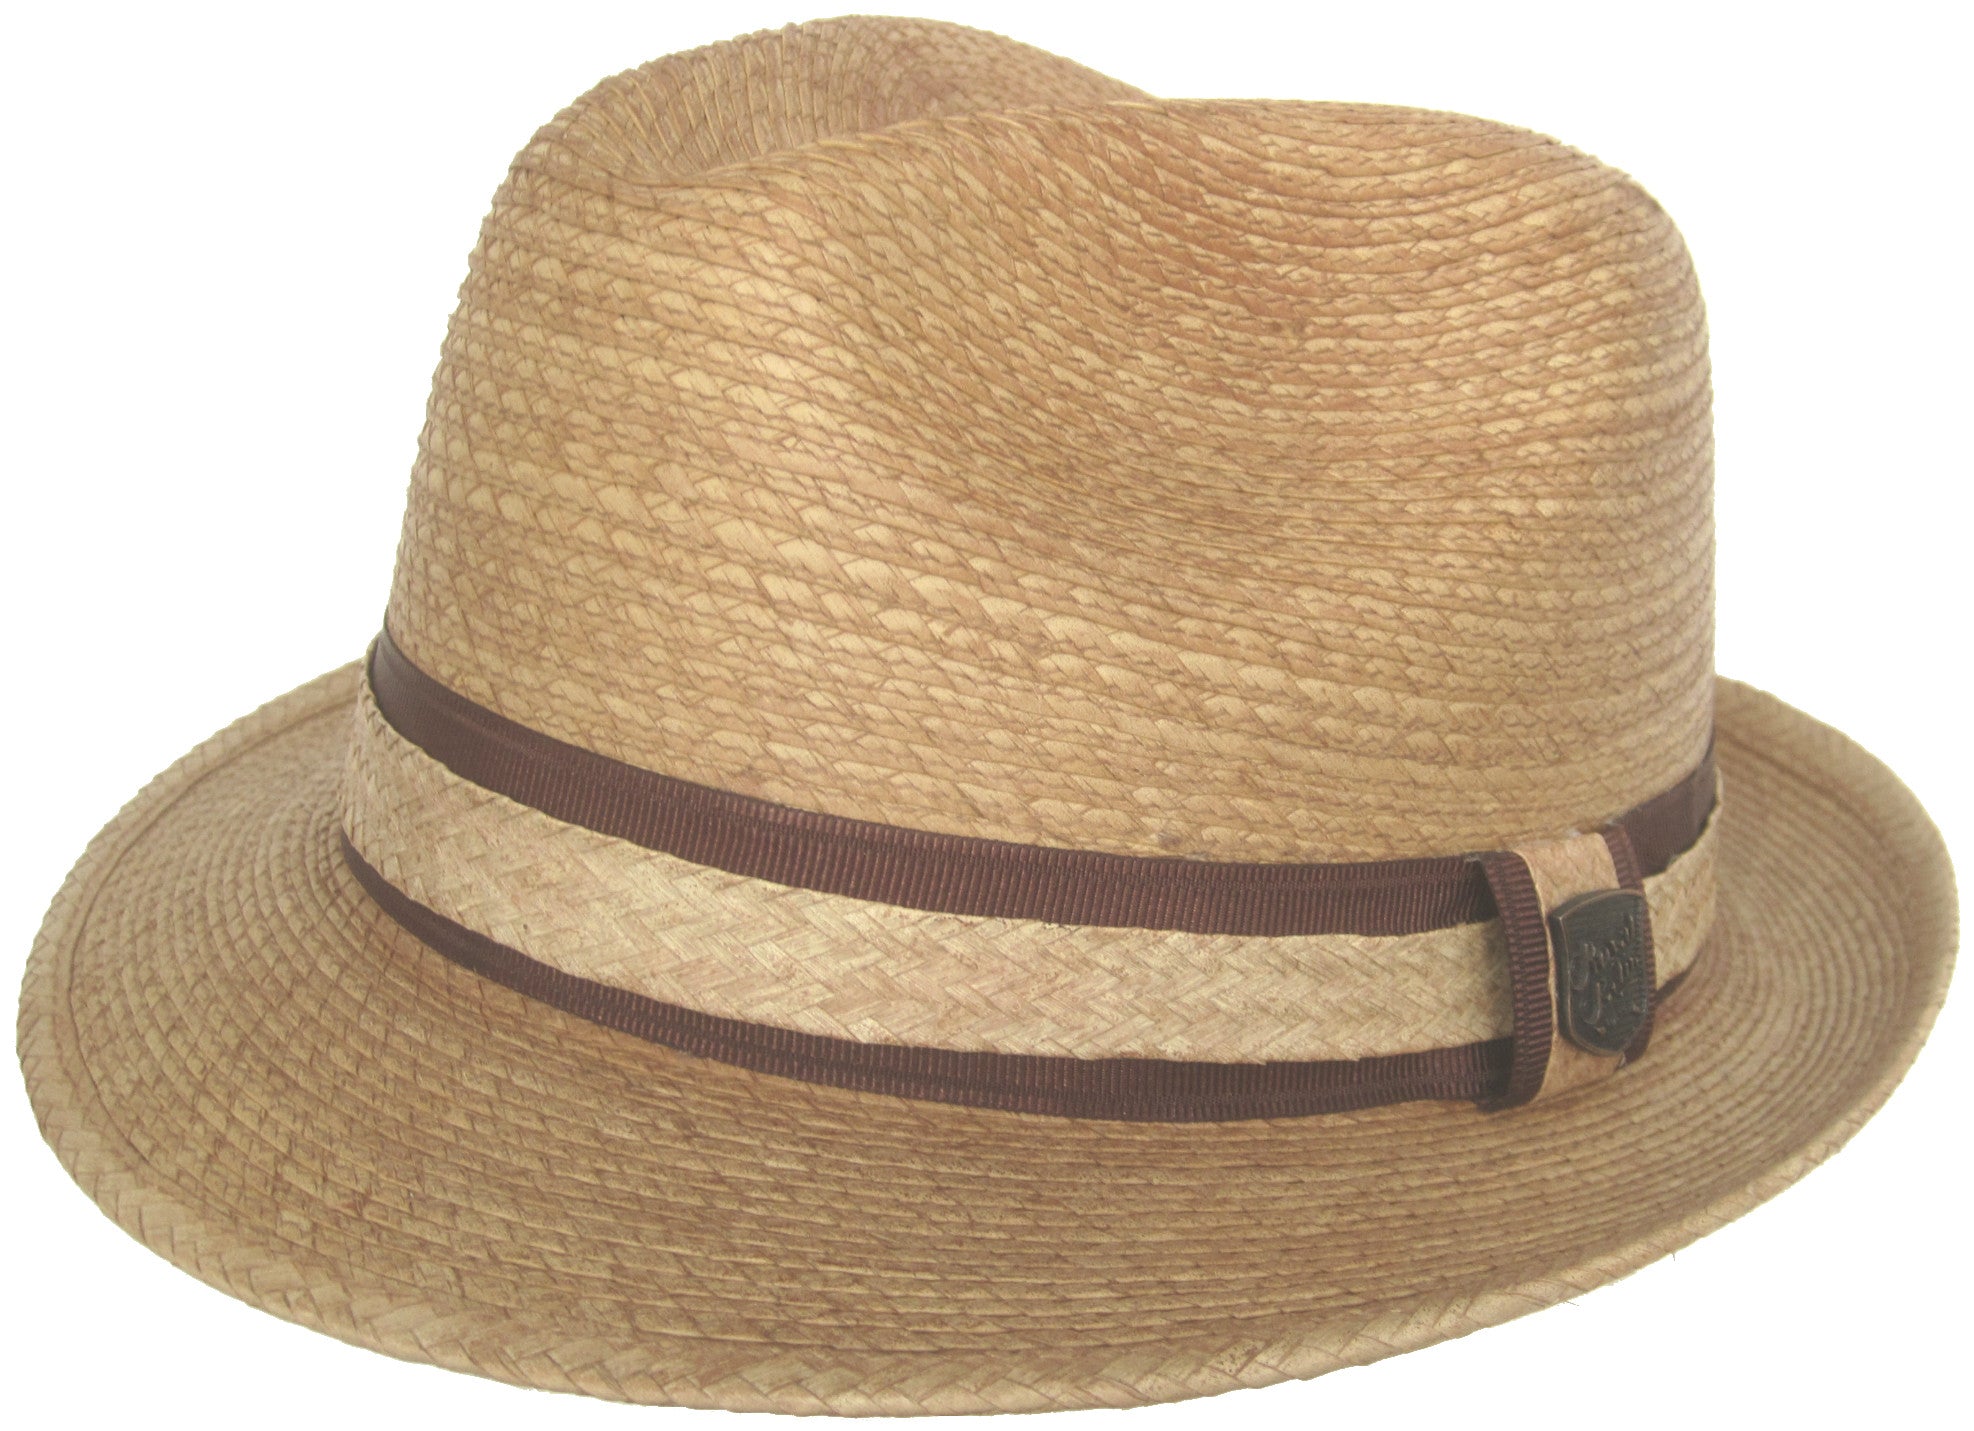 Natural Straw Fedora-Gold Bees adornments-Go To Hat-Summer Fedora-Ever –  Geaux Chapeaux Millinery